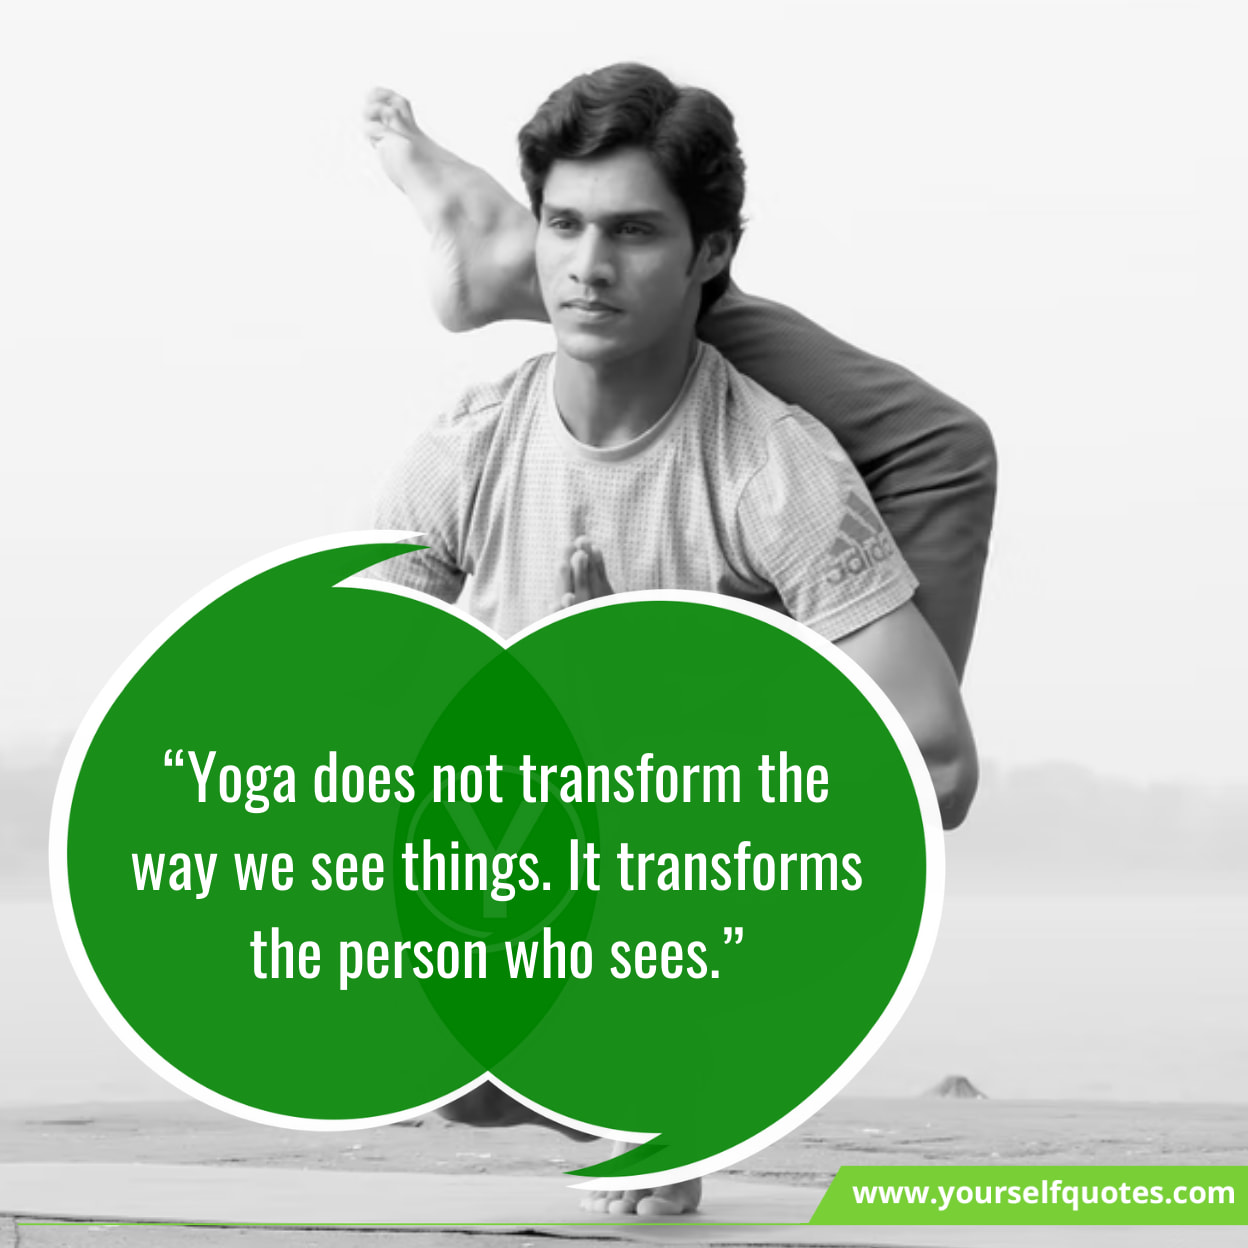 Motivational Quotes On Yoga 